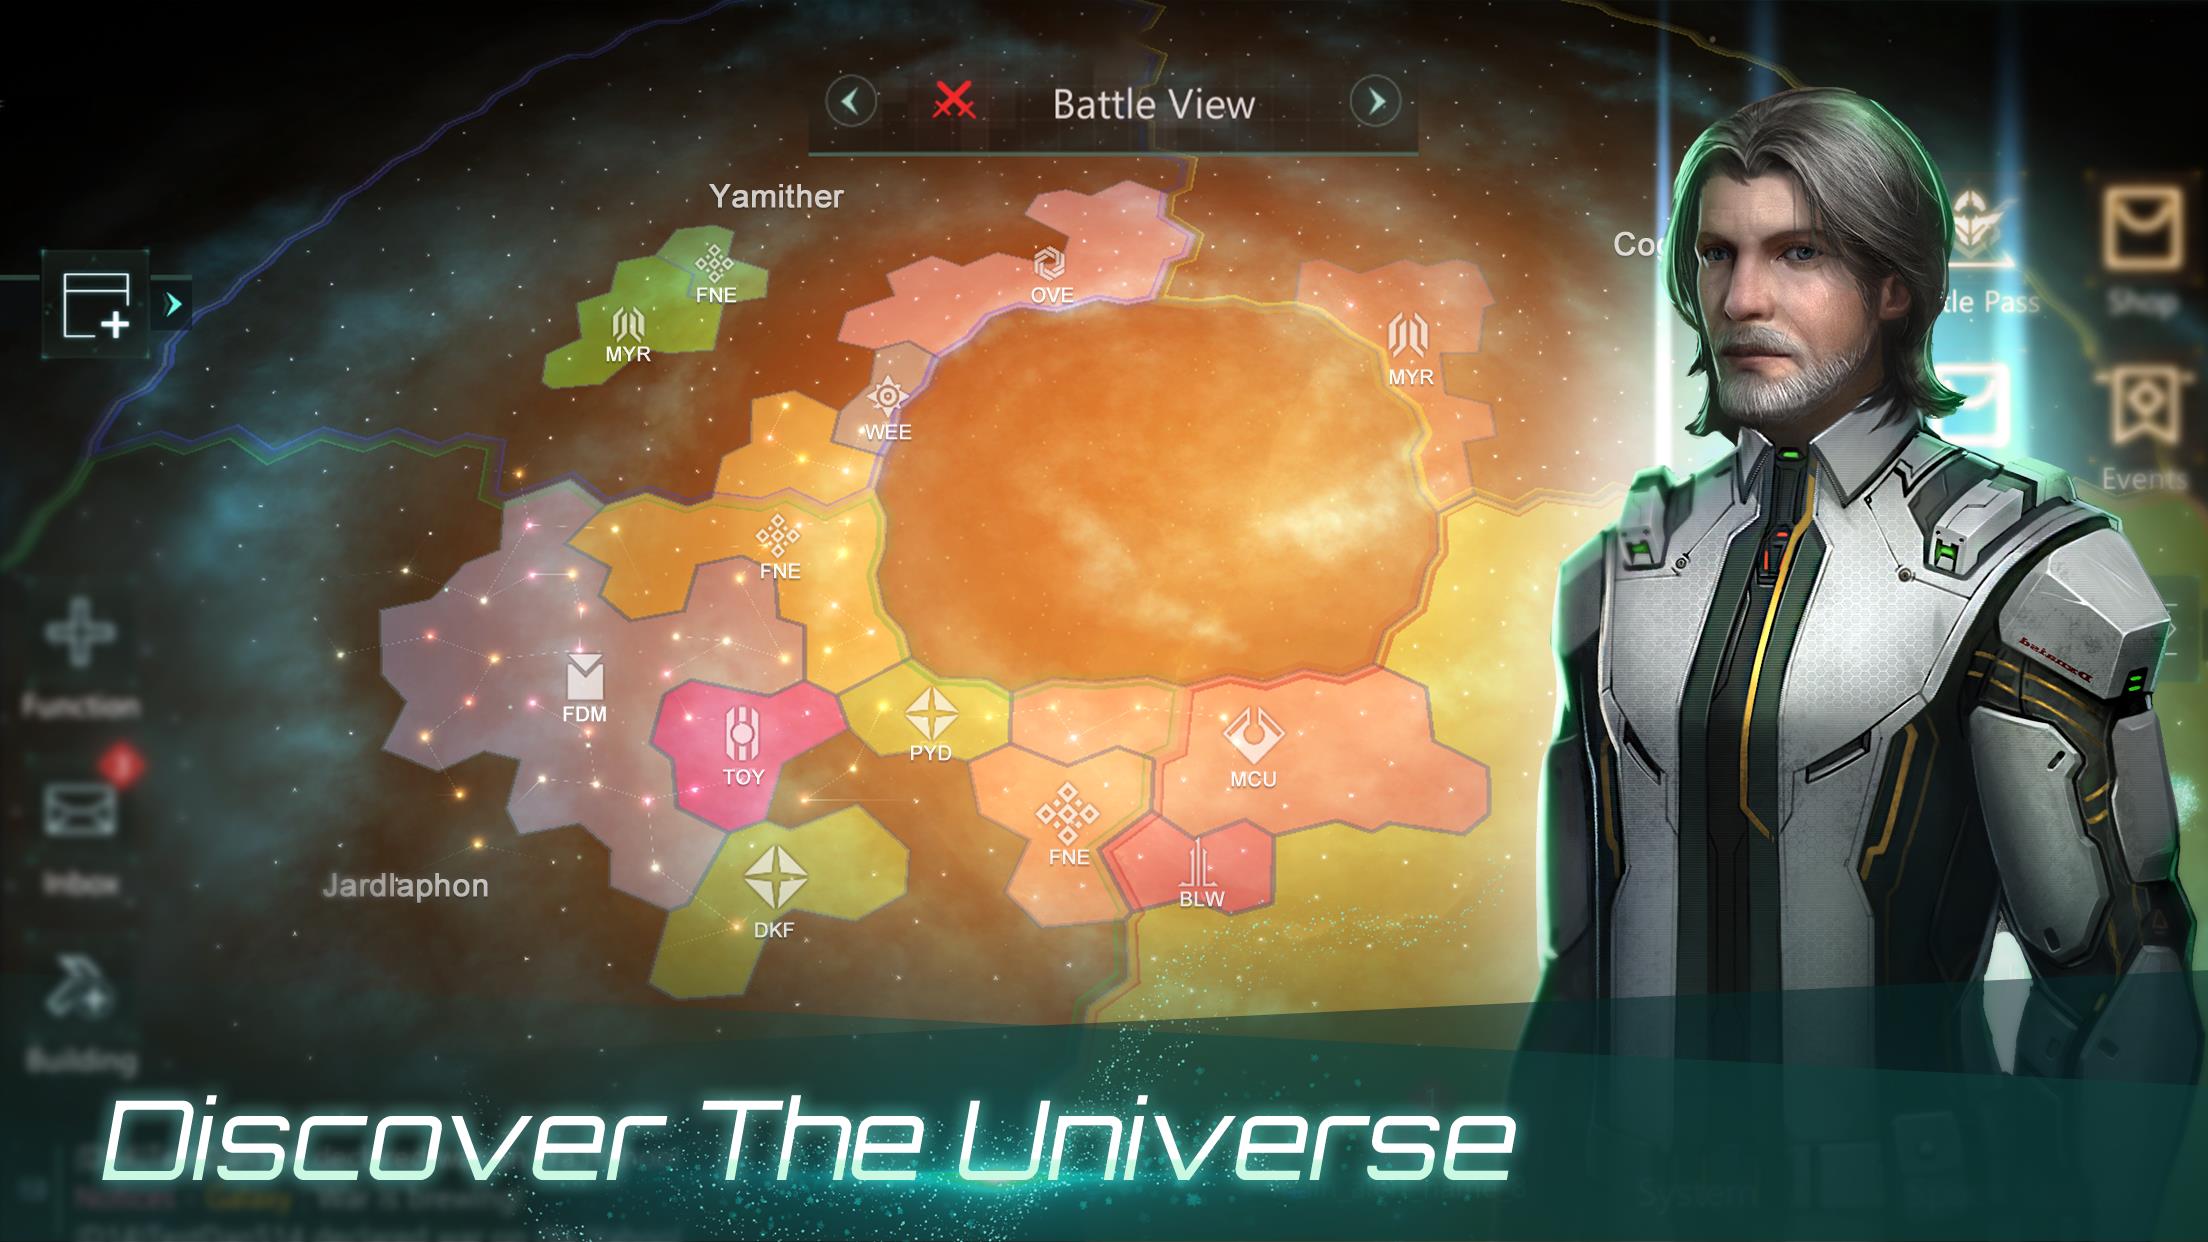 Image for Stellaris' iOS/Android beta pulled shortly after launch for plagiarising Halo 4 art